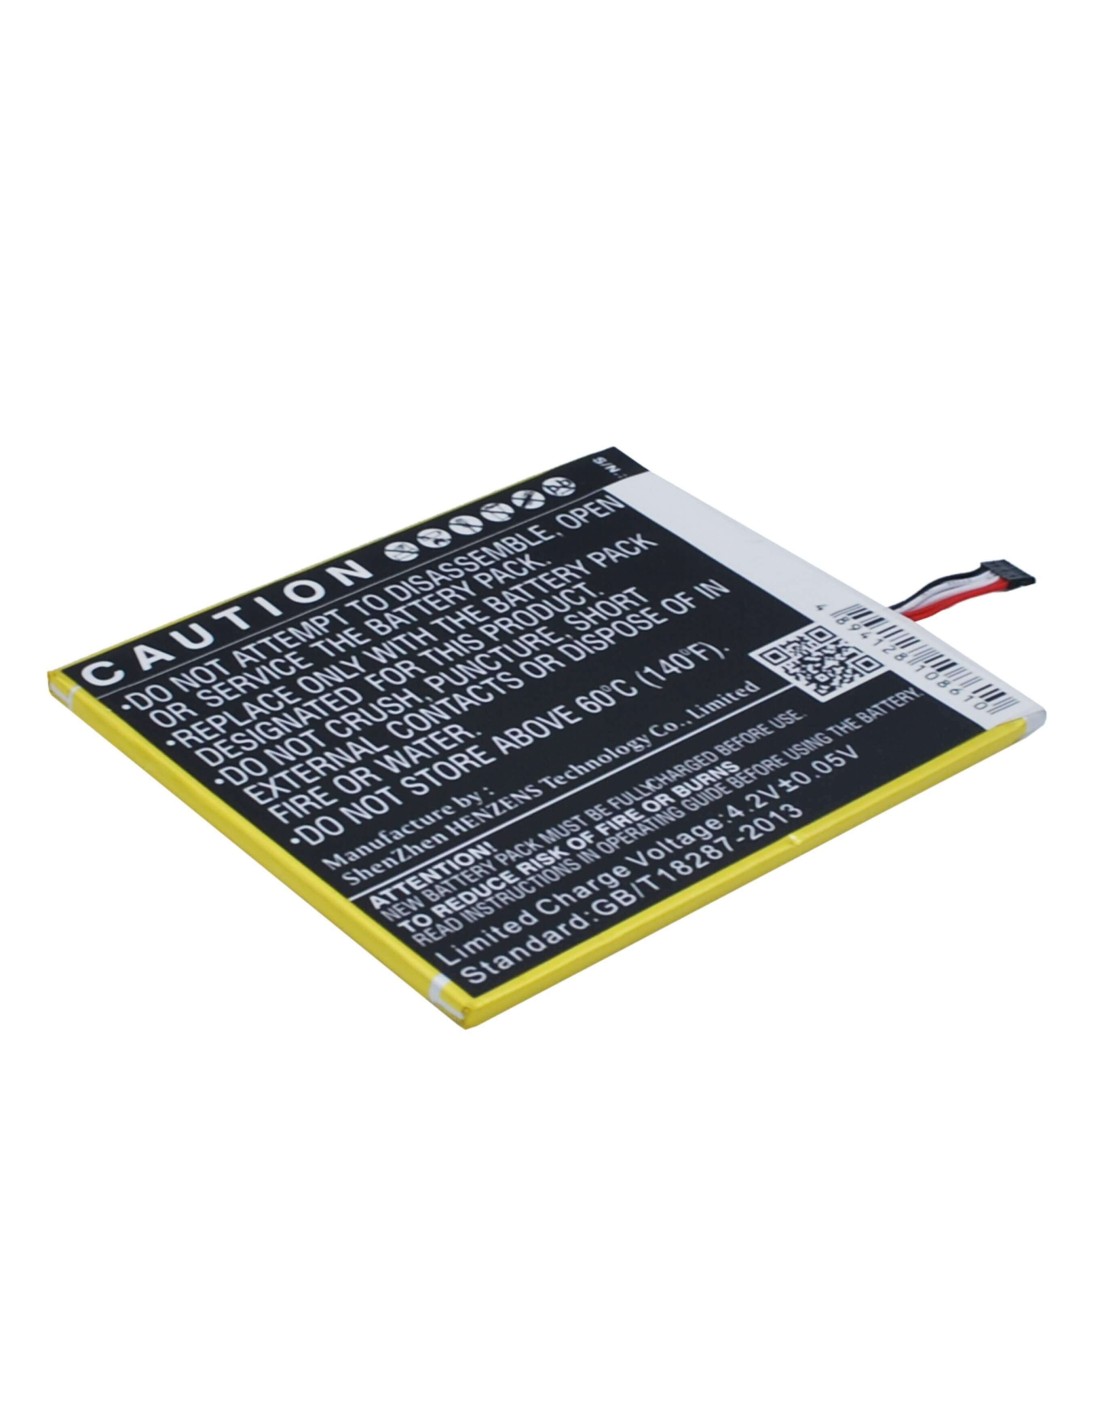 Battery for Amazon Kindle Fire Hd 7 Inch, Sq46cw 3.7V, 3500mAh - 12.95Wh